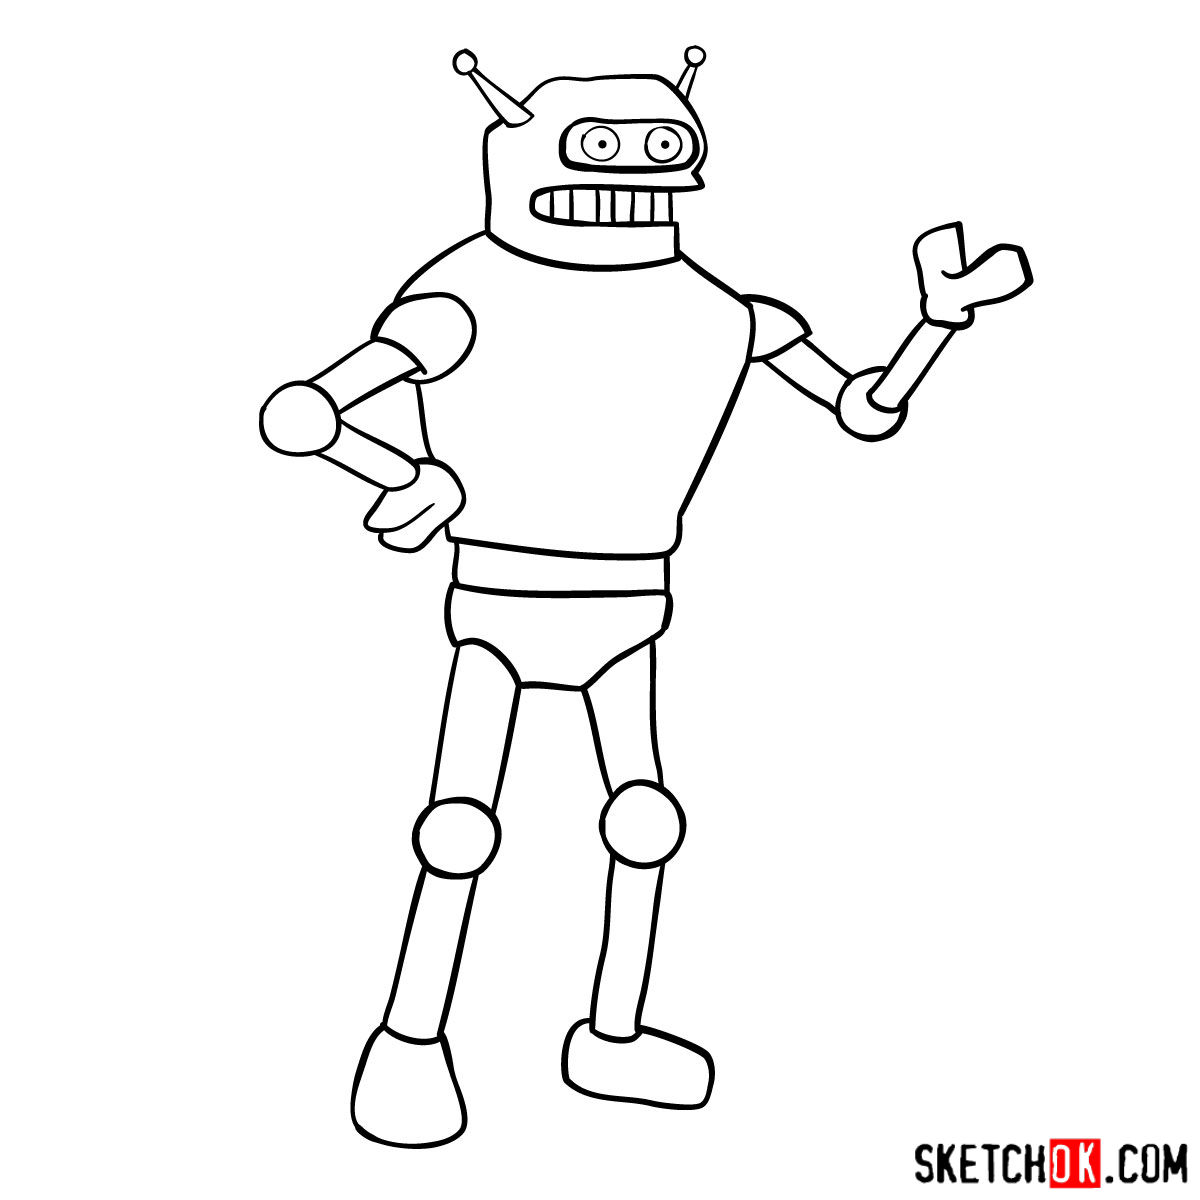 How to draw Calculon from Futurama - step 11